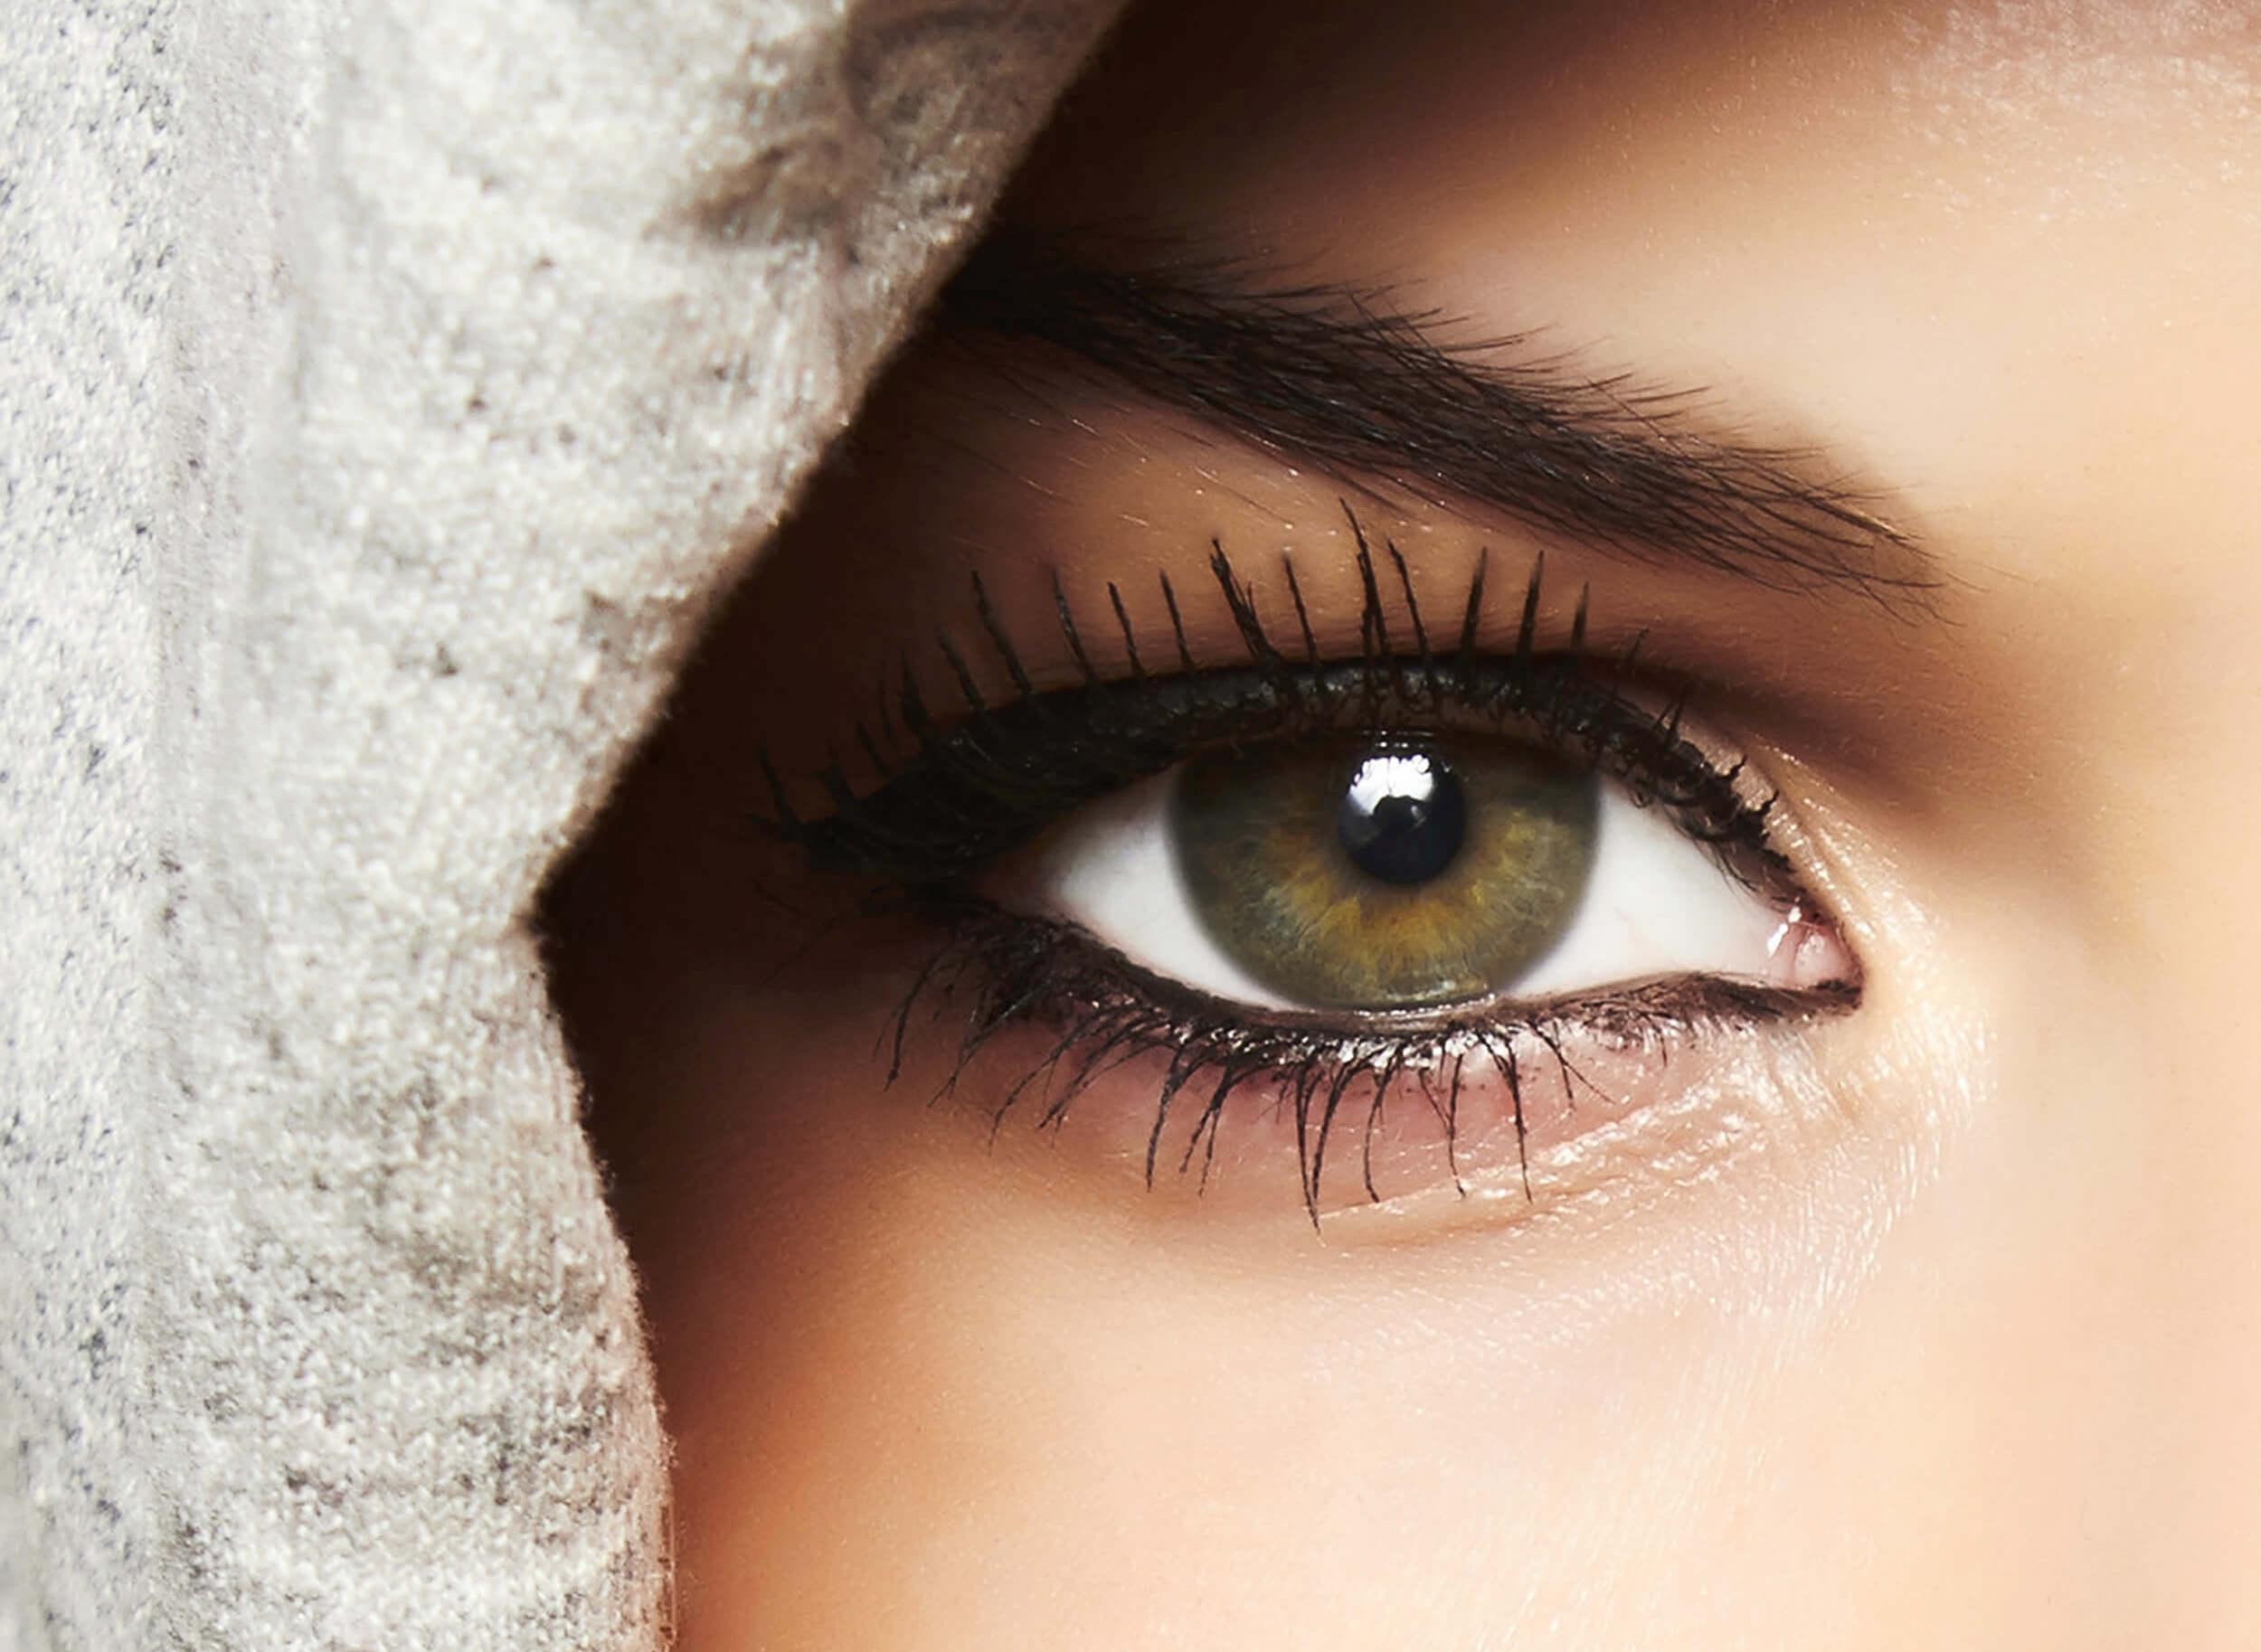 The Best Makeup Ideas for Hooded Eyes - The Value Place